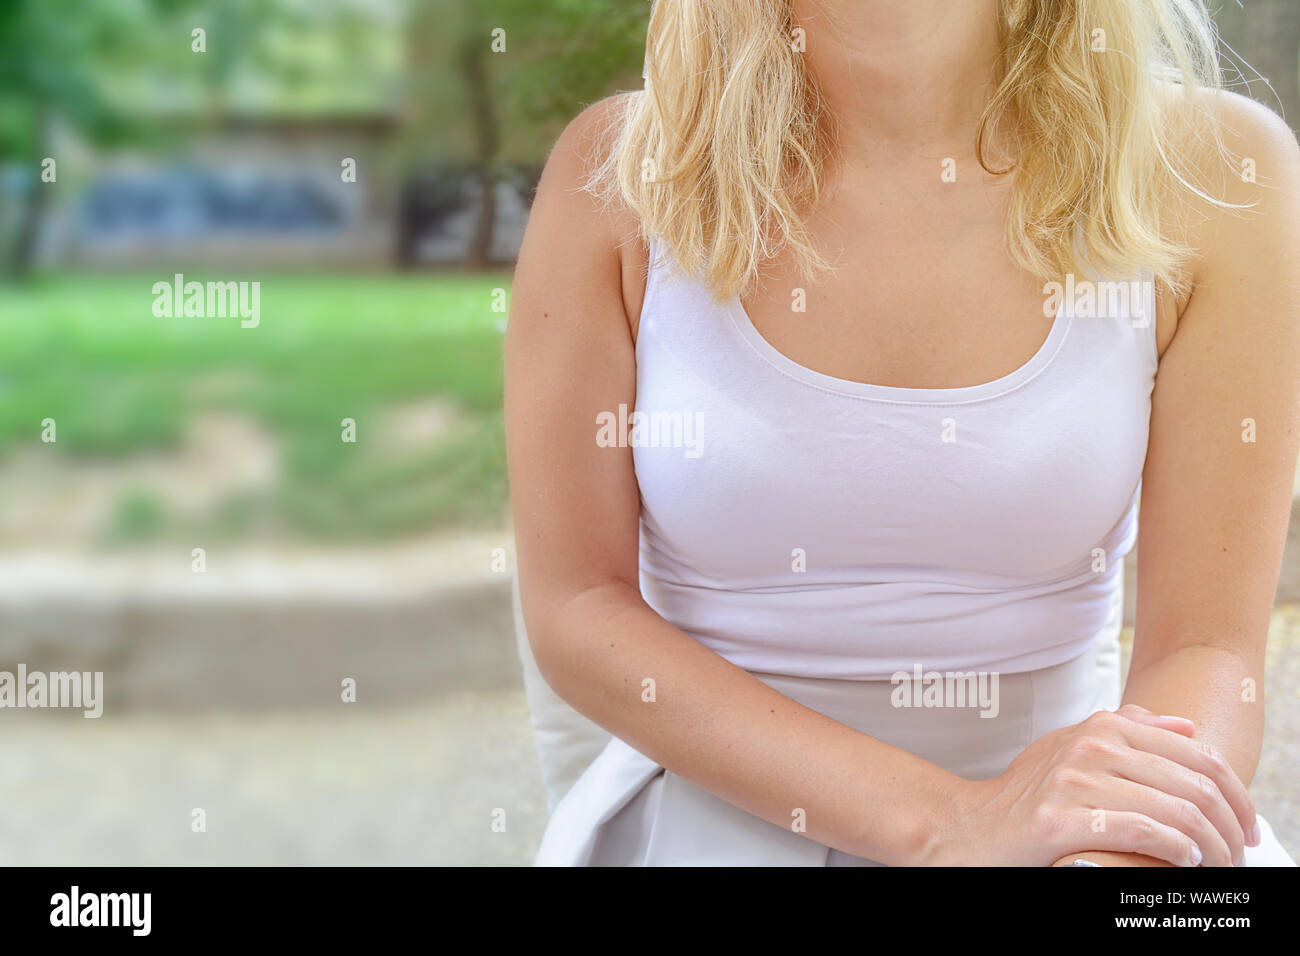 Beautiful young girl spends her time enjoying herself Stock Photo